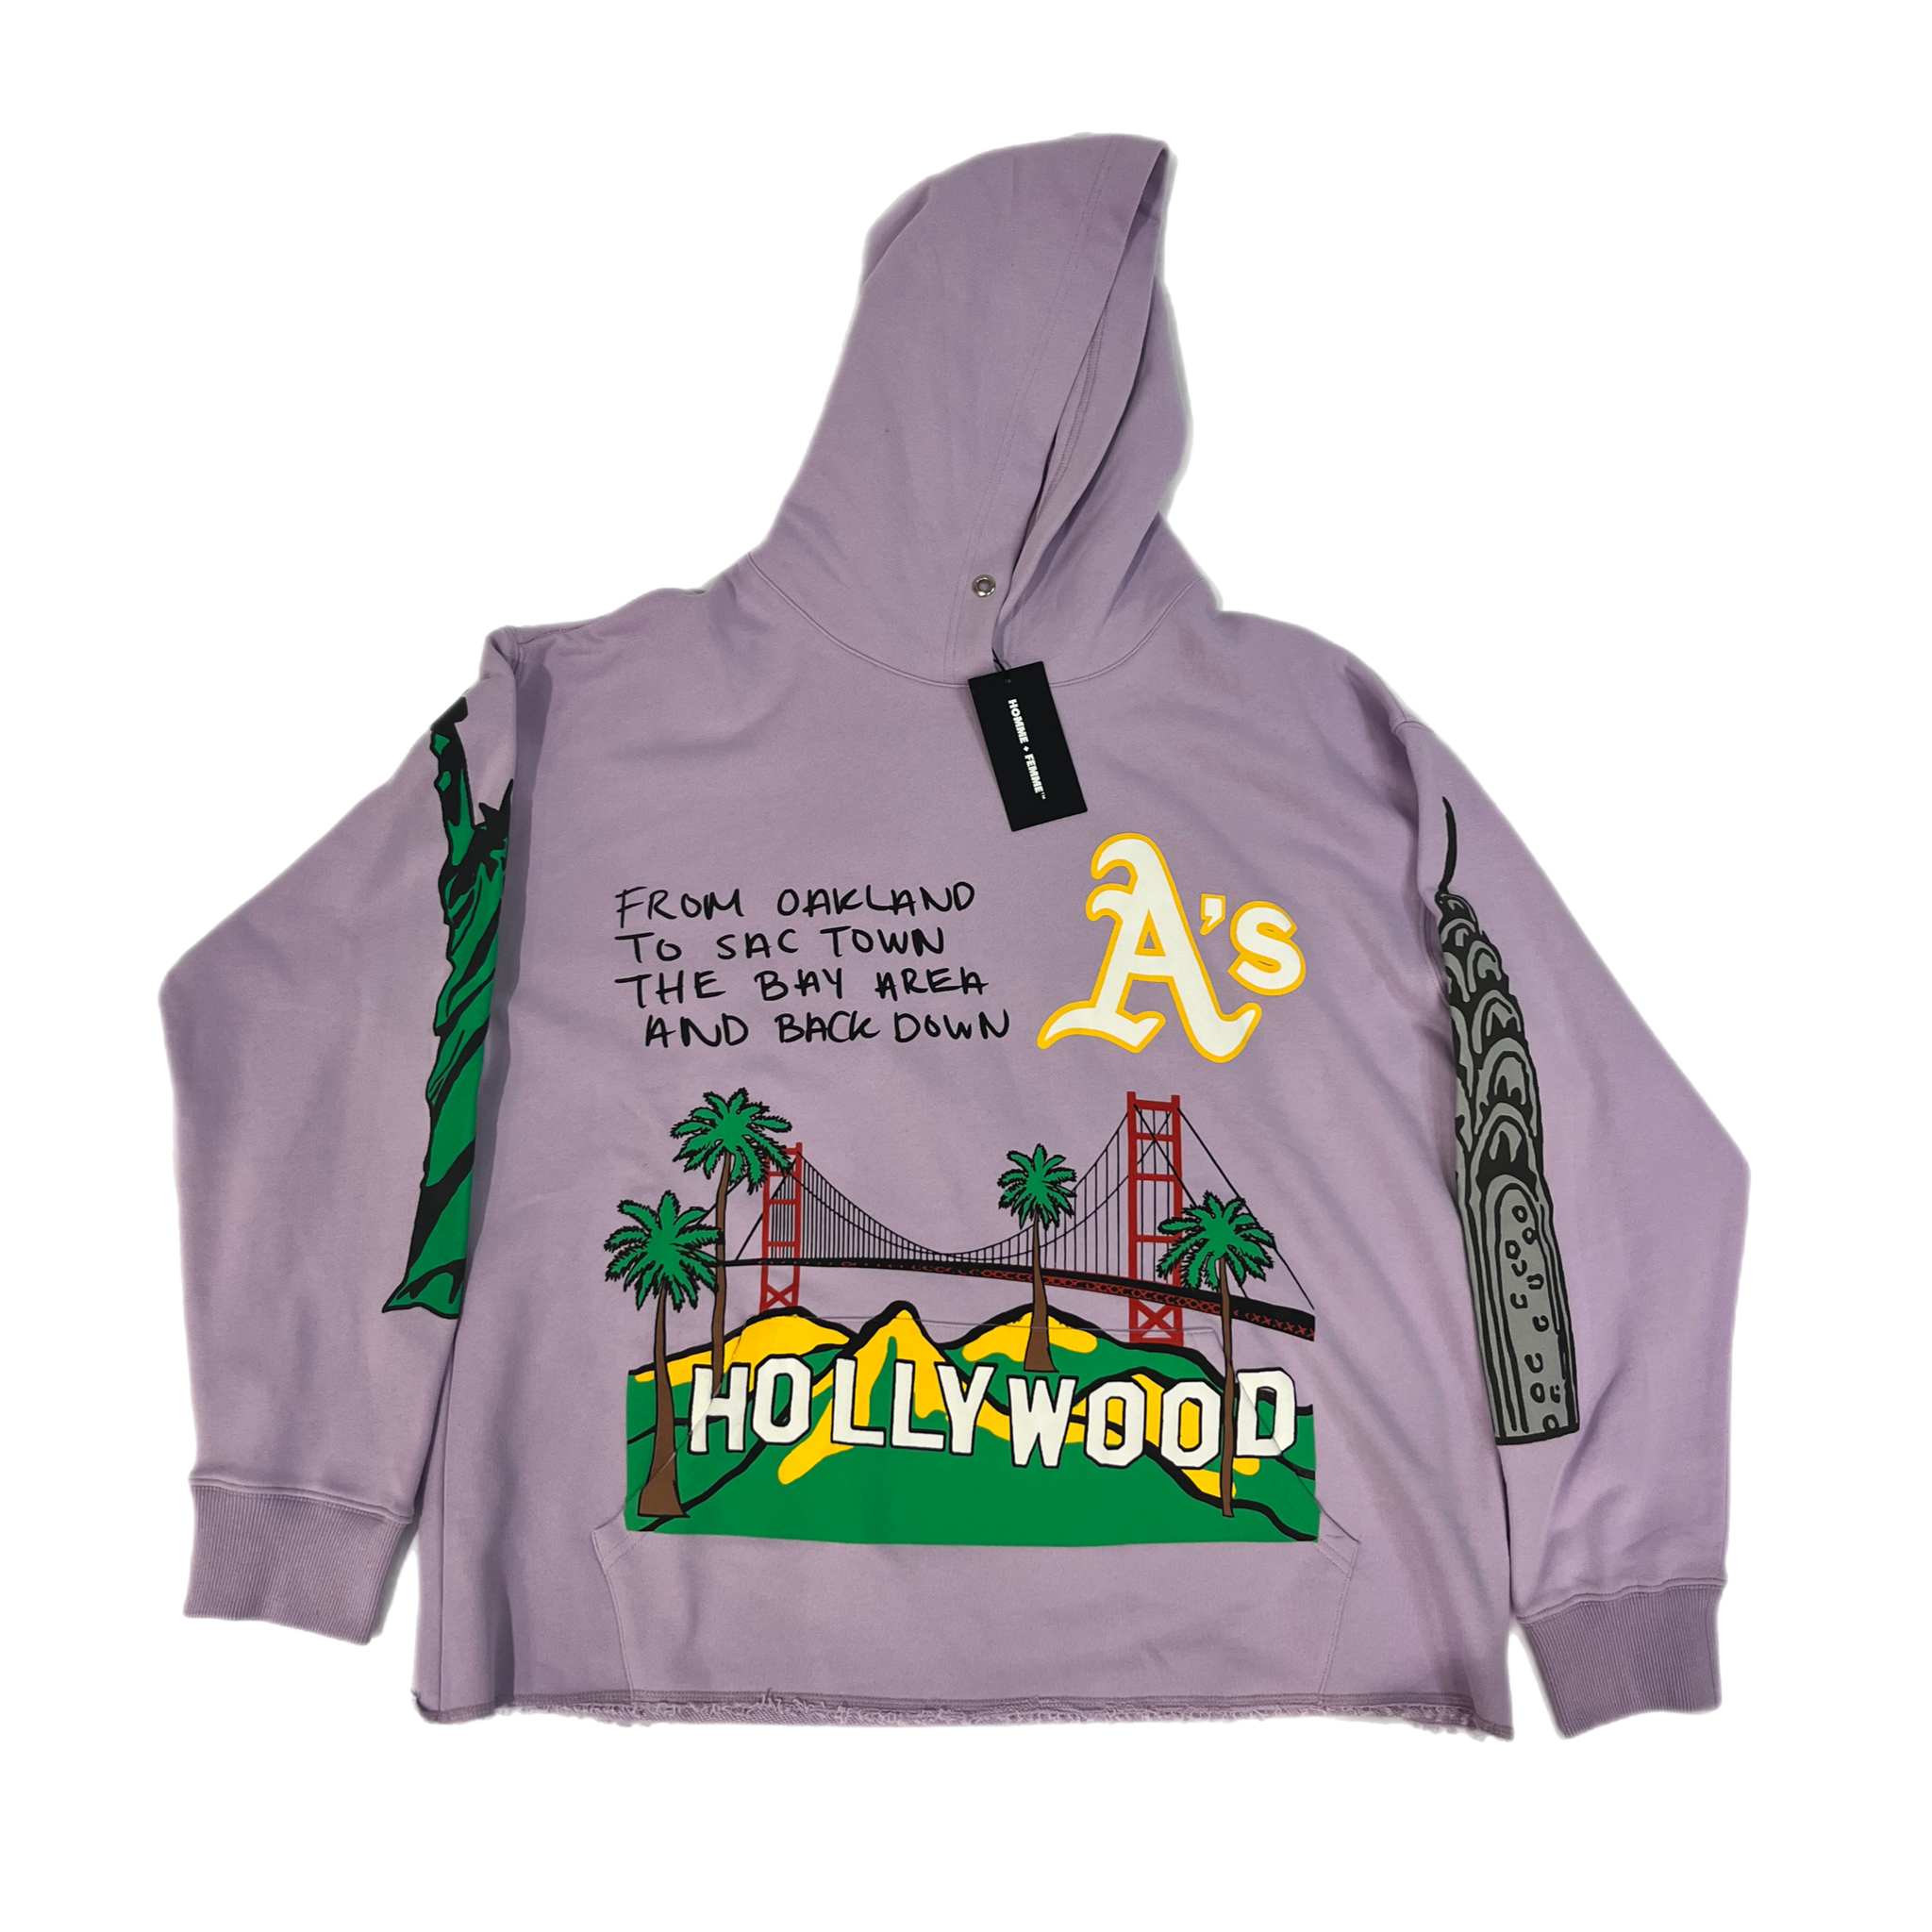 Homme Femme - Light Purple Hollywood Hoodie - Size Large